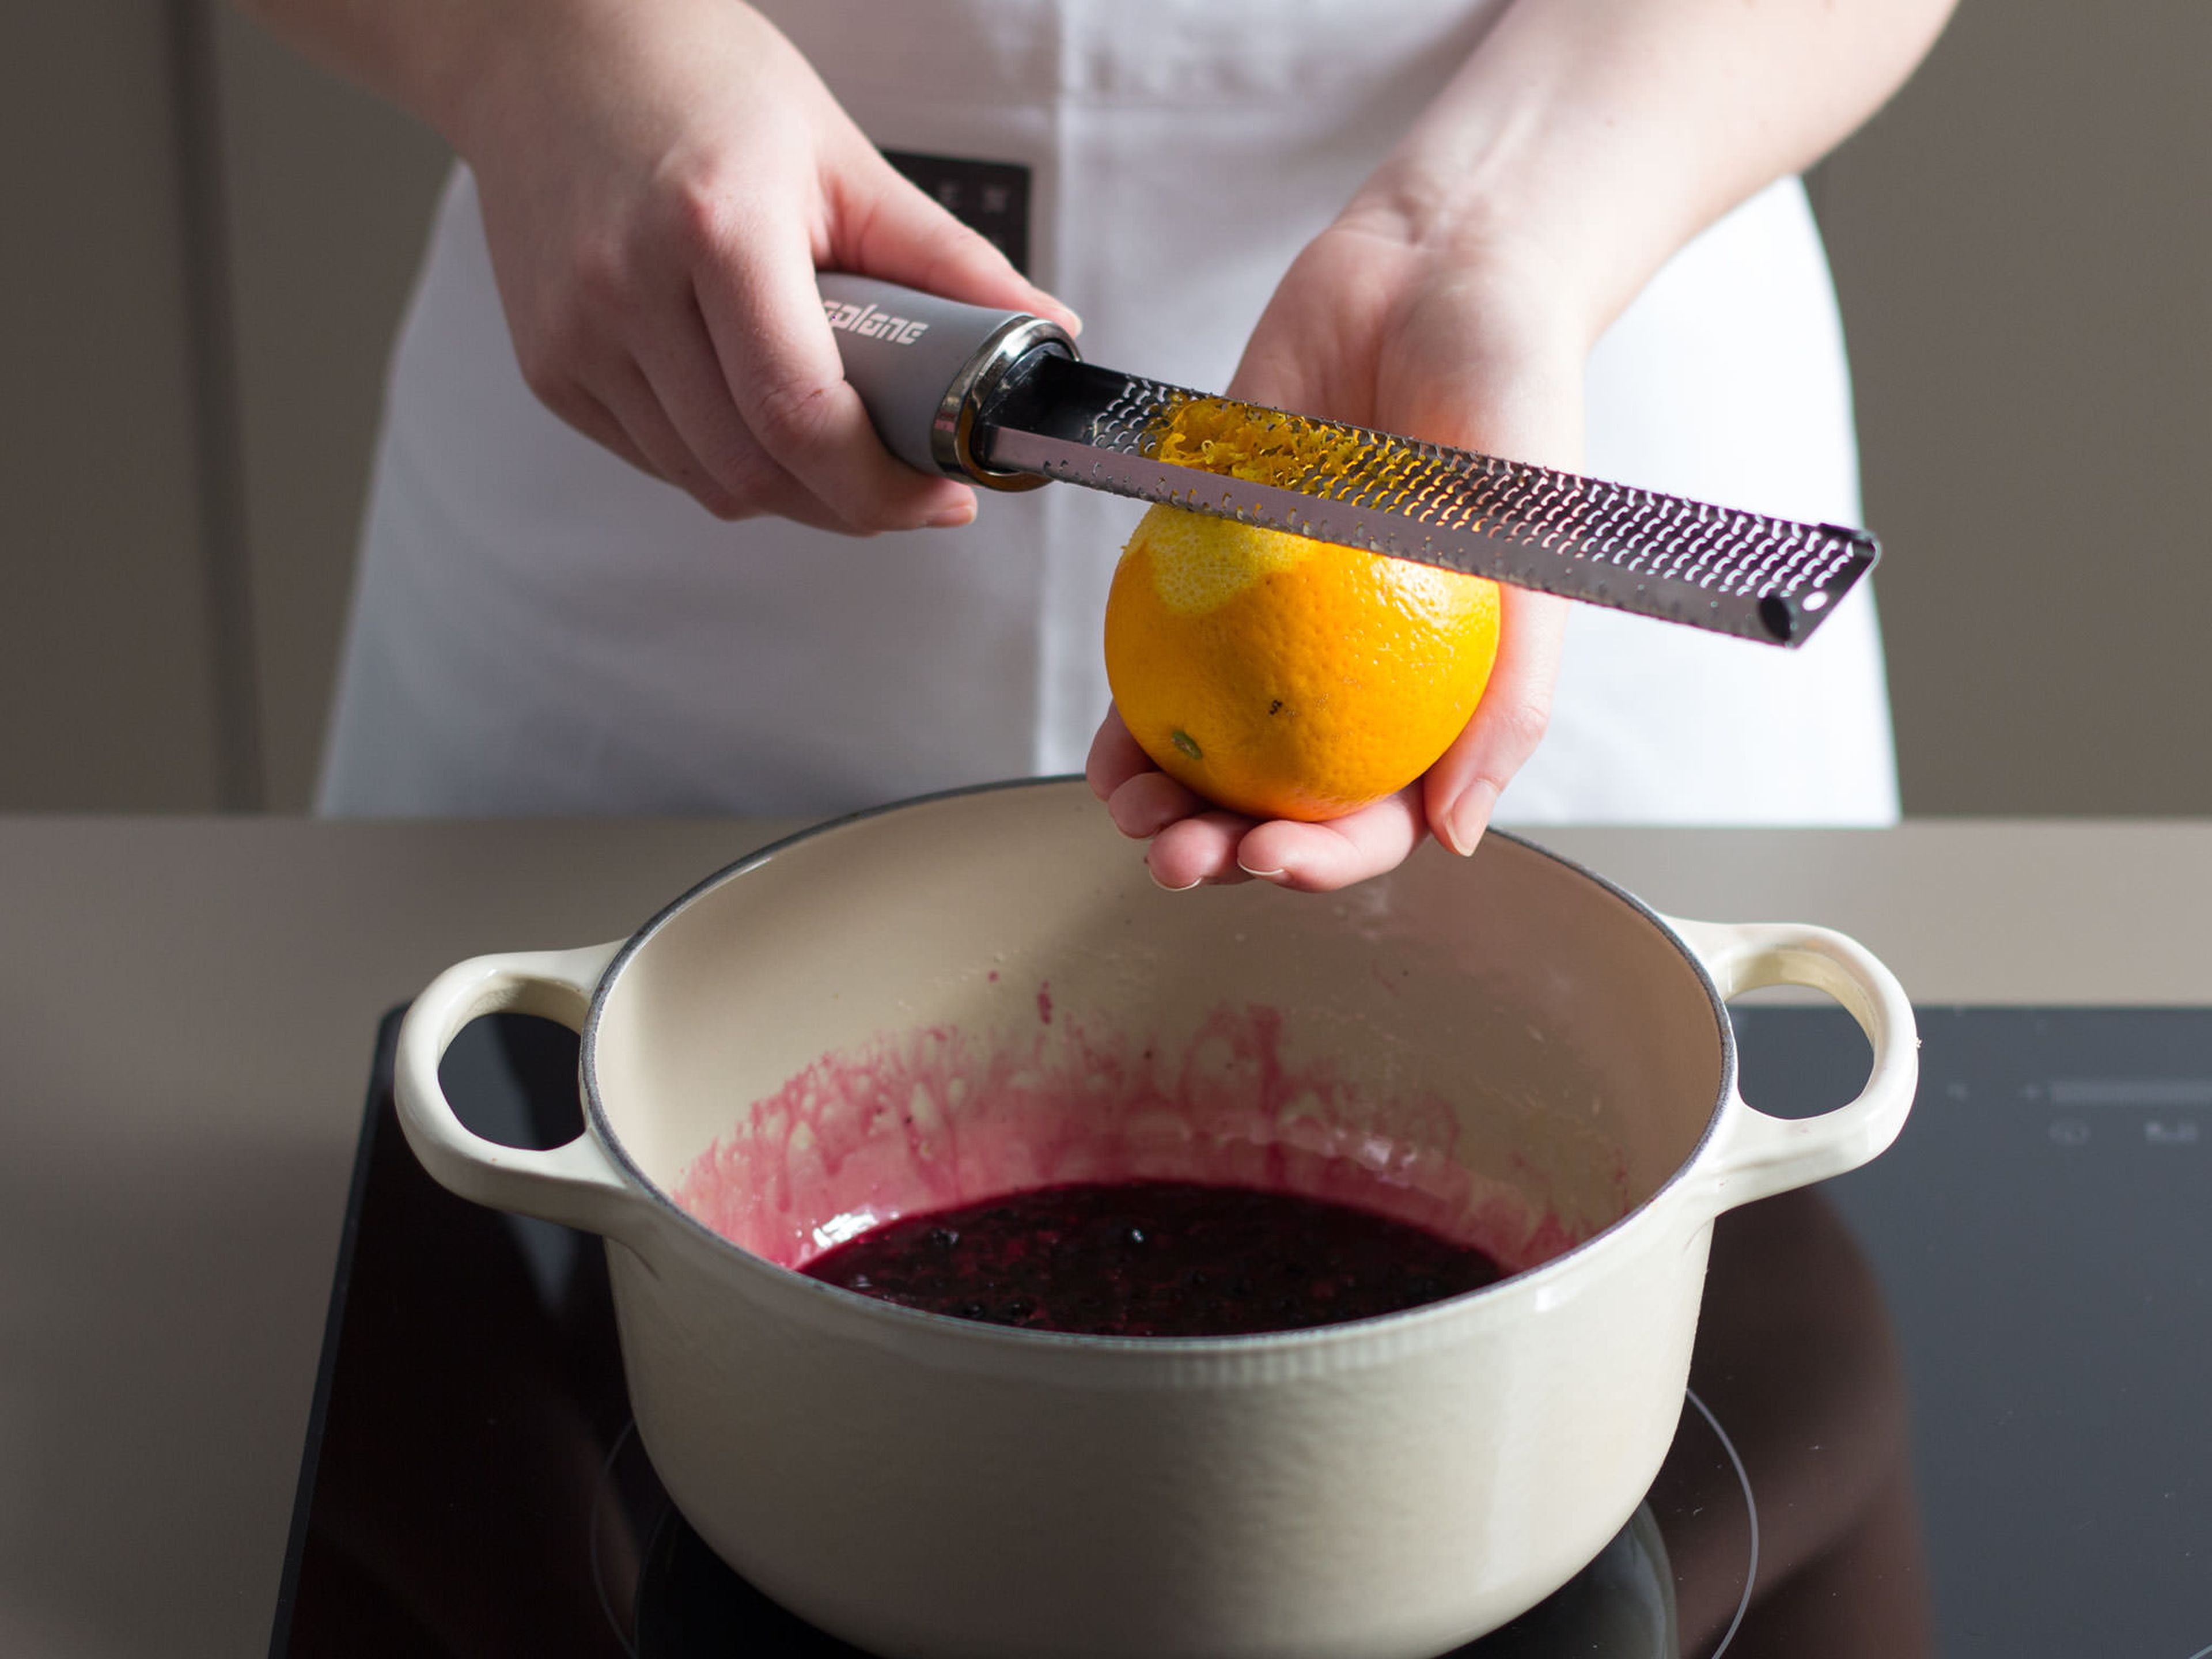 For the blueberry sauce, caramelize remainder of sugar in a large saucepan over medium-low heat for approx. 3 – 5 min., stirring constantly. Deglaze with lemon and orange juice. Then, add frozen blueberries, remainder of vanilla pod, and zest from lemon and orange and continue to cook for approx. 5 – 7 min. until sauce thickens.